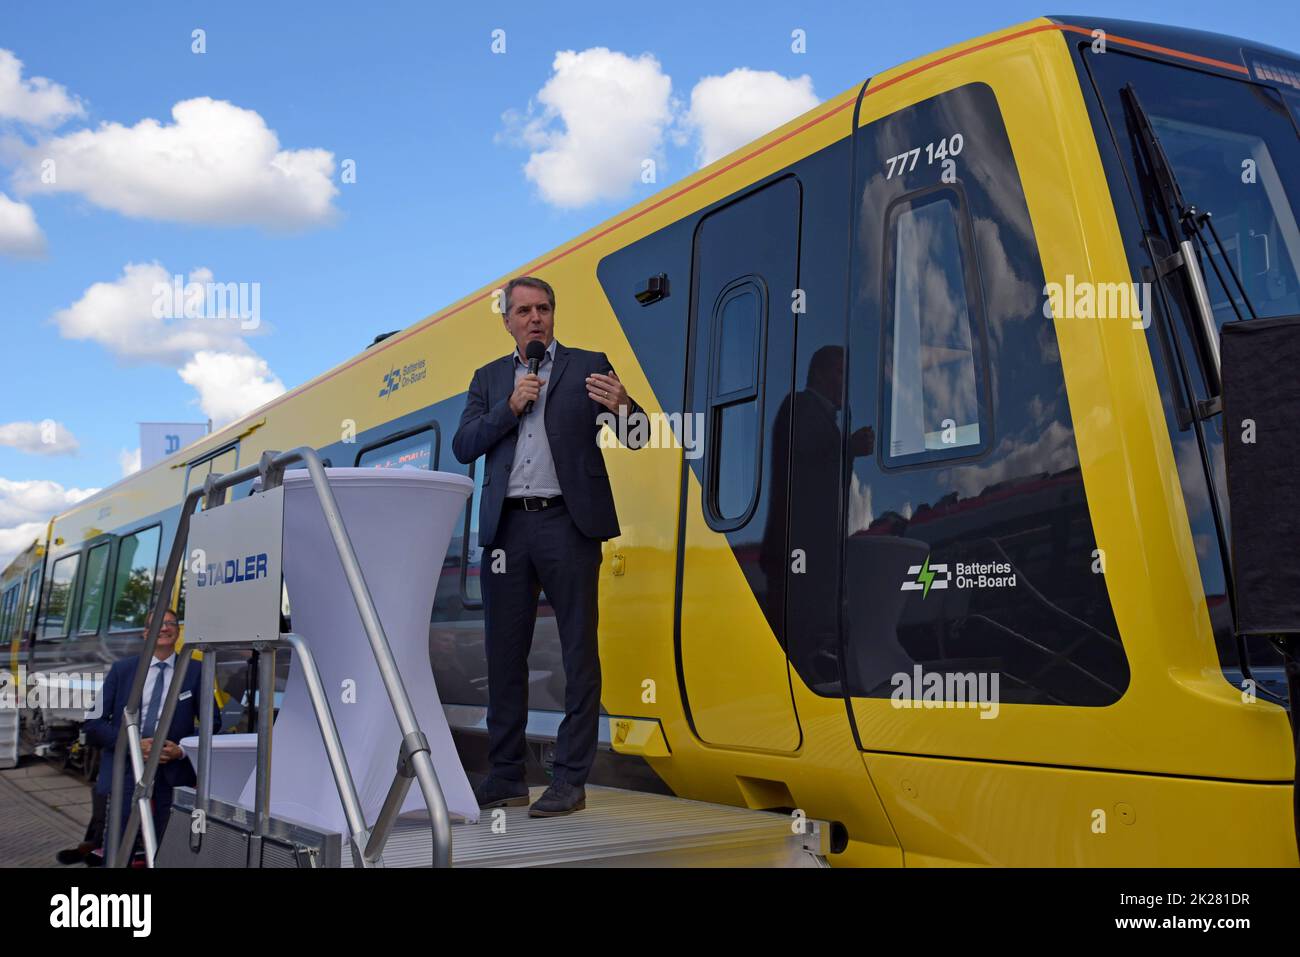 Berlin, Germany, 22nd September 2022. Train manufacturer Stadler has officially unveiled its new IPEMU Merseytravel Class 777 train with Metro Mayor for the Liverpool City Region Steve Rotheram, at Innotrans 2022, the international transport exhibition. The mayor, viewing the first train of the 52 strong fleet, said they had been “bought by the public for the public, putting the ‘public’ back into public transport”. He also said that the services will be integrated with the city’s buses and ferries. Although the majority of the fleet will be just 3rd rail powered, 7 will have battery packs to Stock Photo